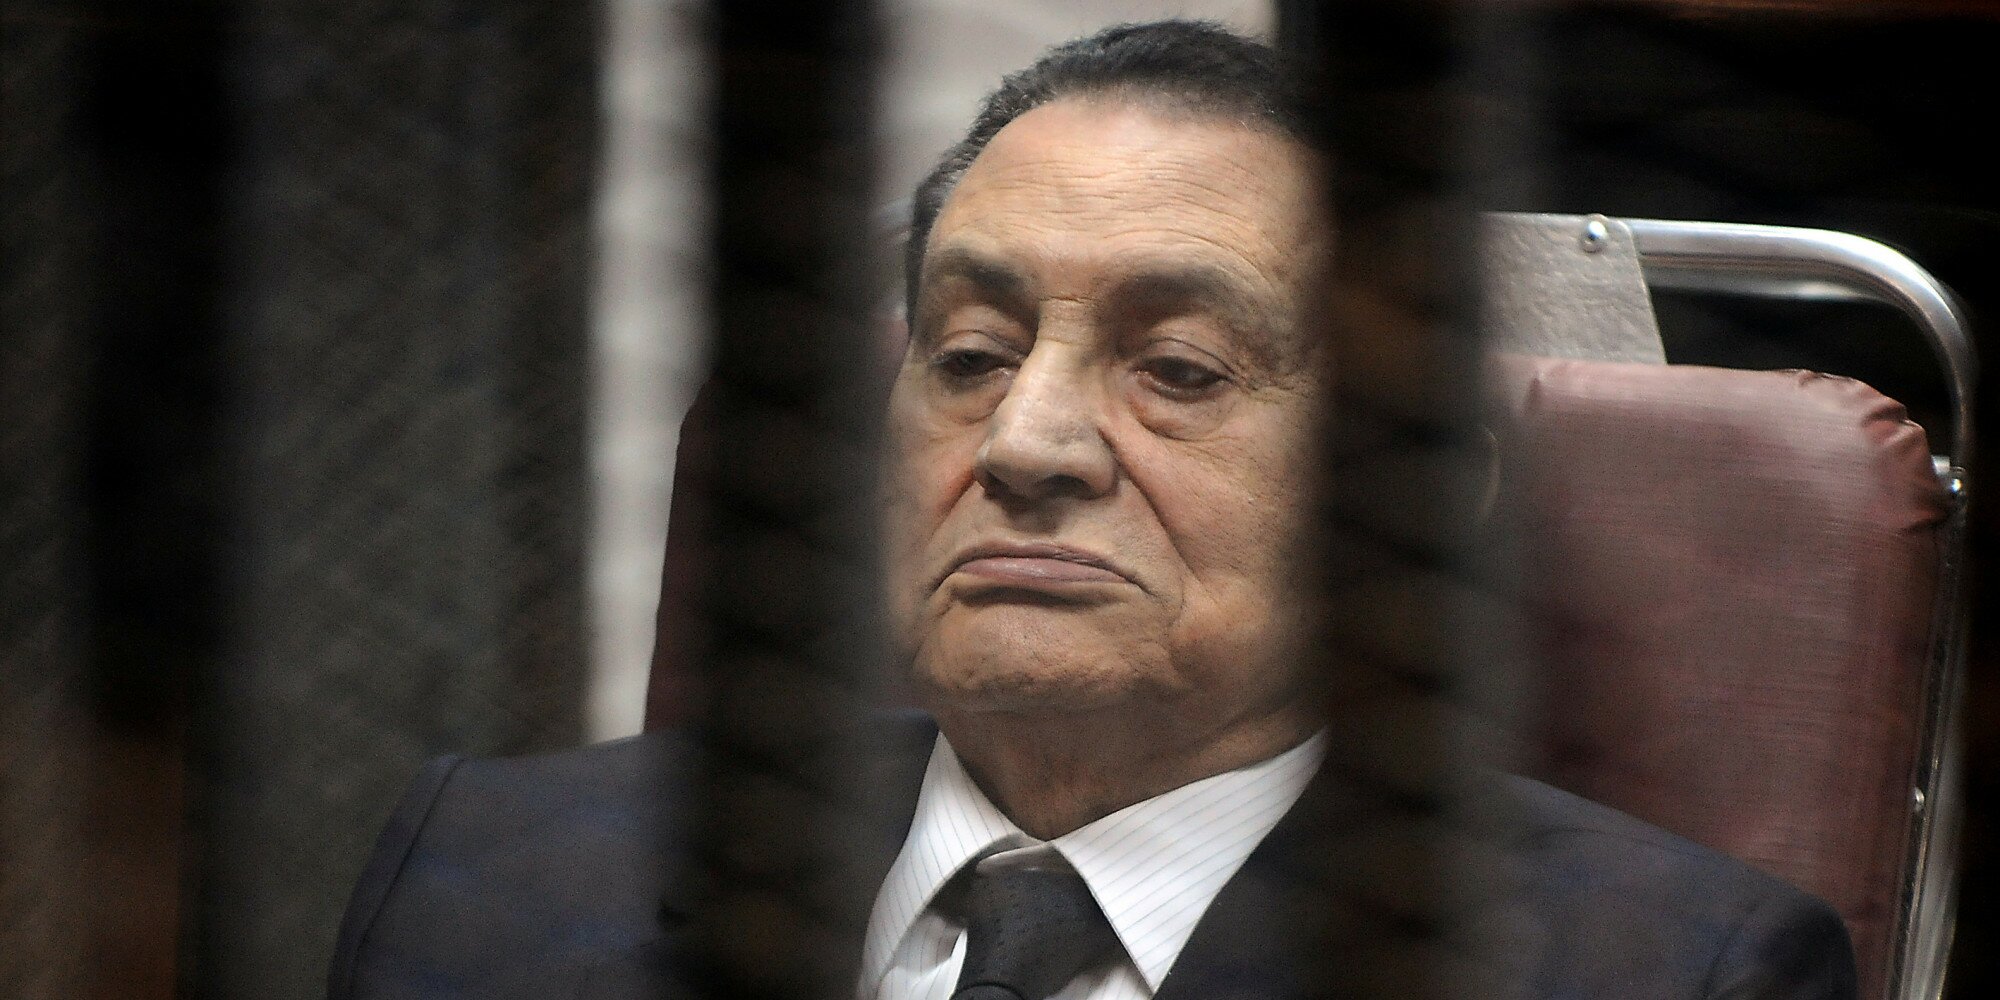 CAIRO, EGYPT - MARCH 19: Ousted Egyptian president Hosni Mubarek, in suit, appears in the trial about expenses for presidential palaces on March 19, 2014 in Cairo, Egypt. (Photo by Ahmed el Masry/Anadolu Agency/Getty Images)